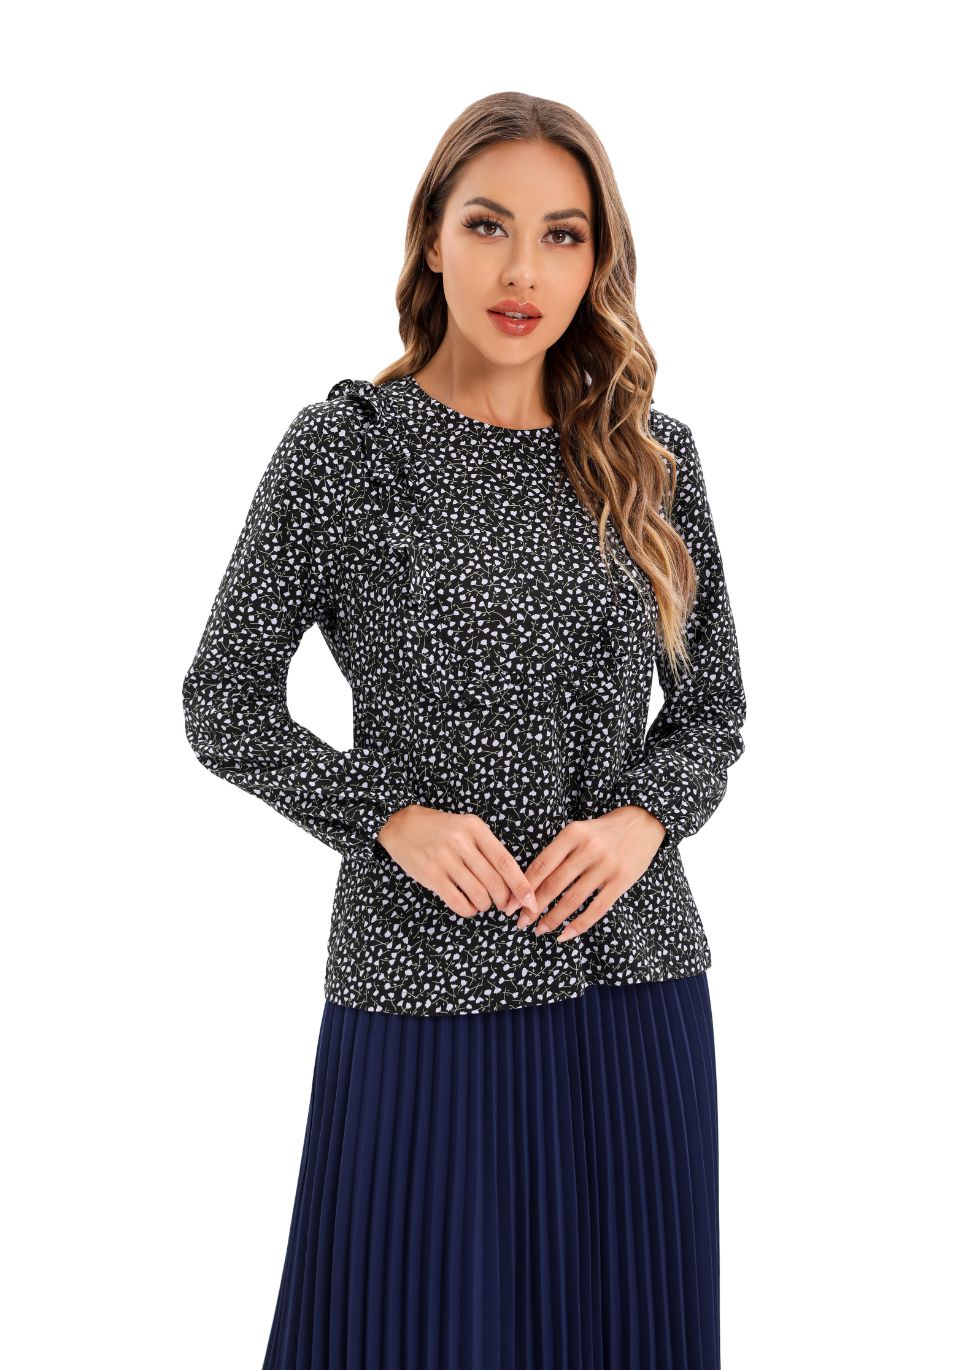 Micro Print Blouse with Long Sleeves and Bib Front - MissFinchNYC